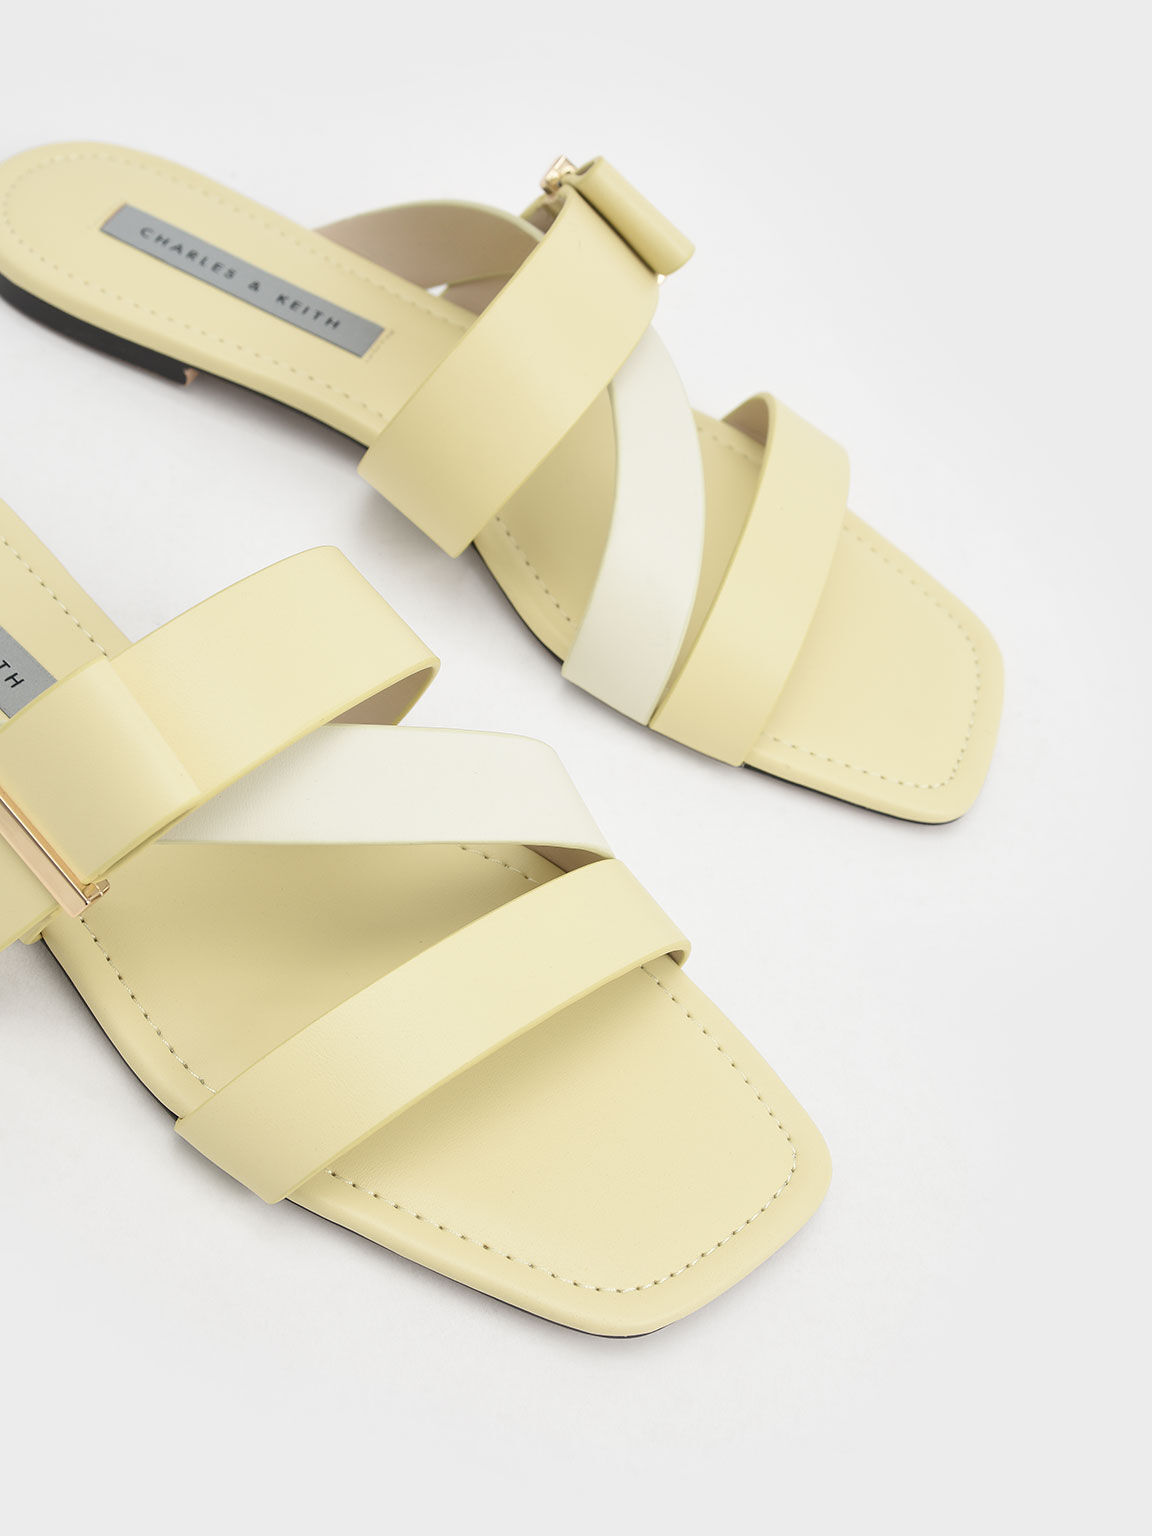 Sandal Slide Metallic Accent Strappy Square-Toe, Yellow, hi-res